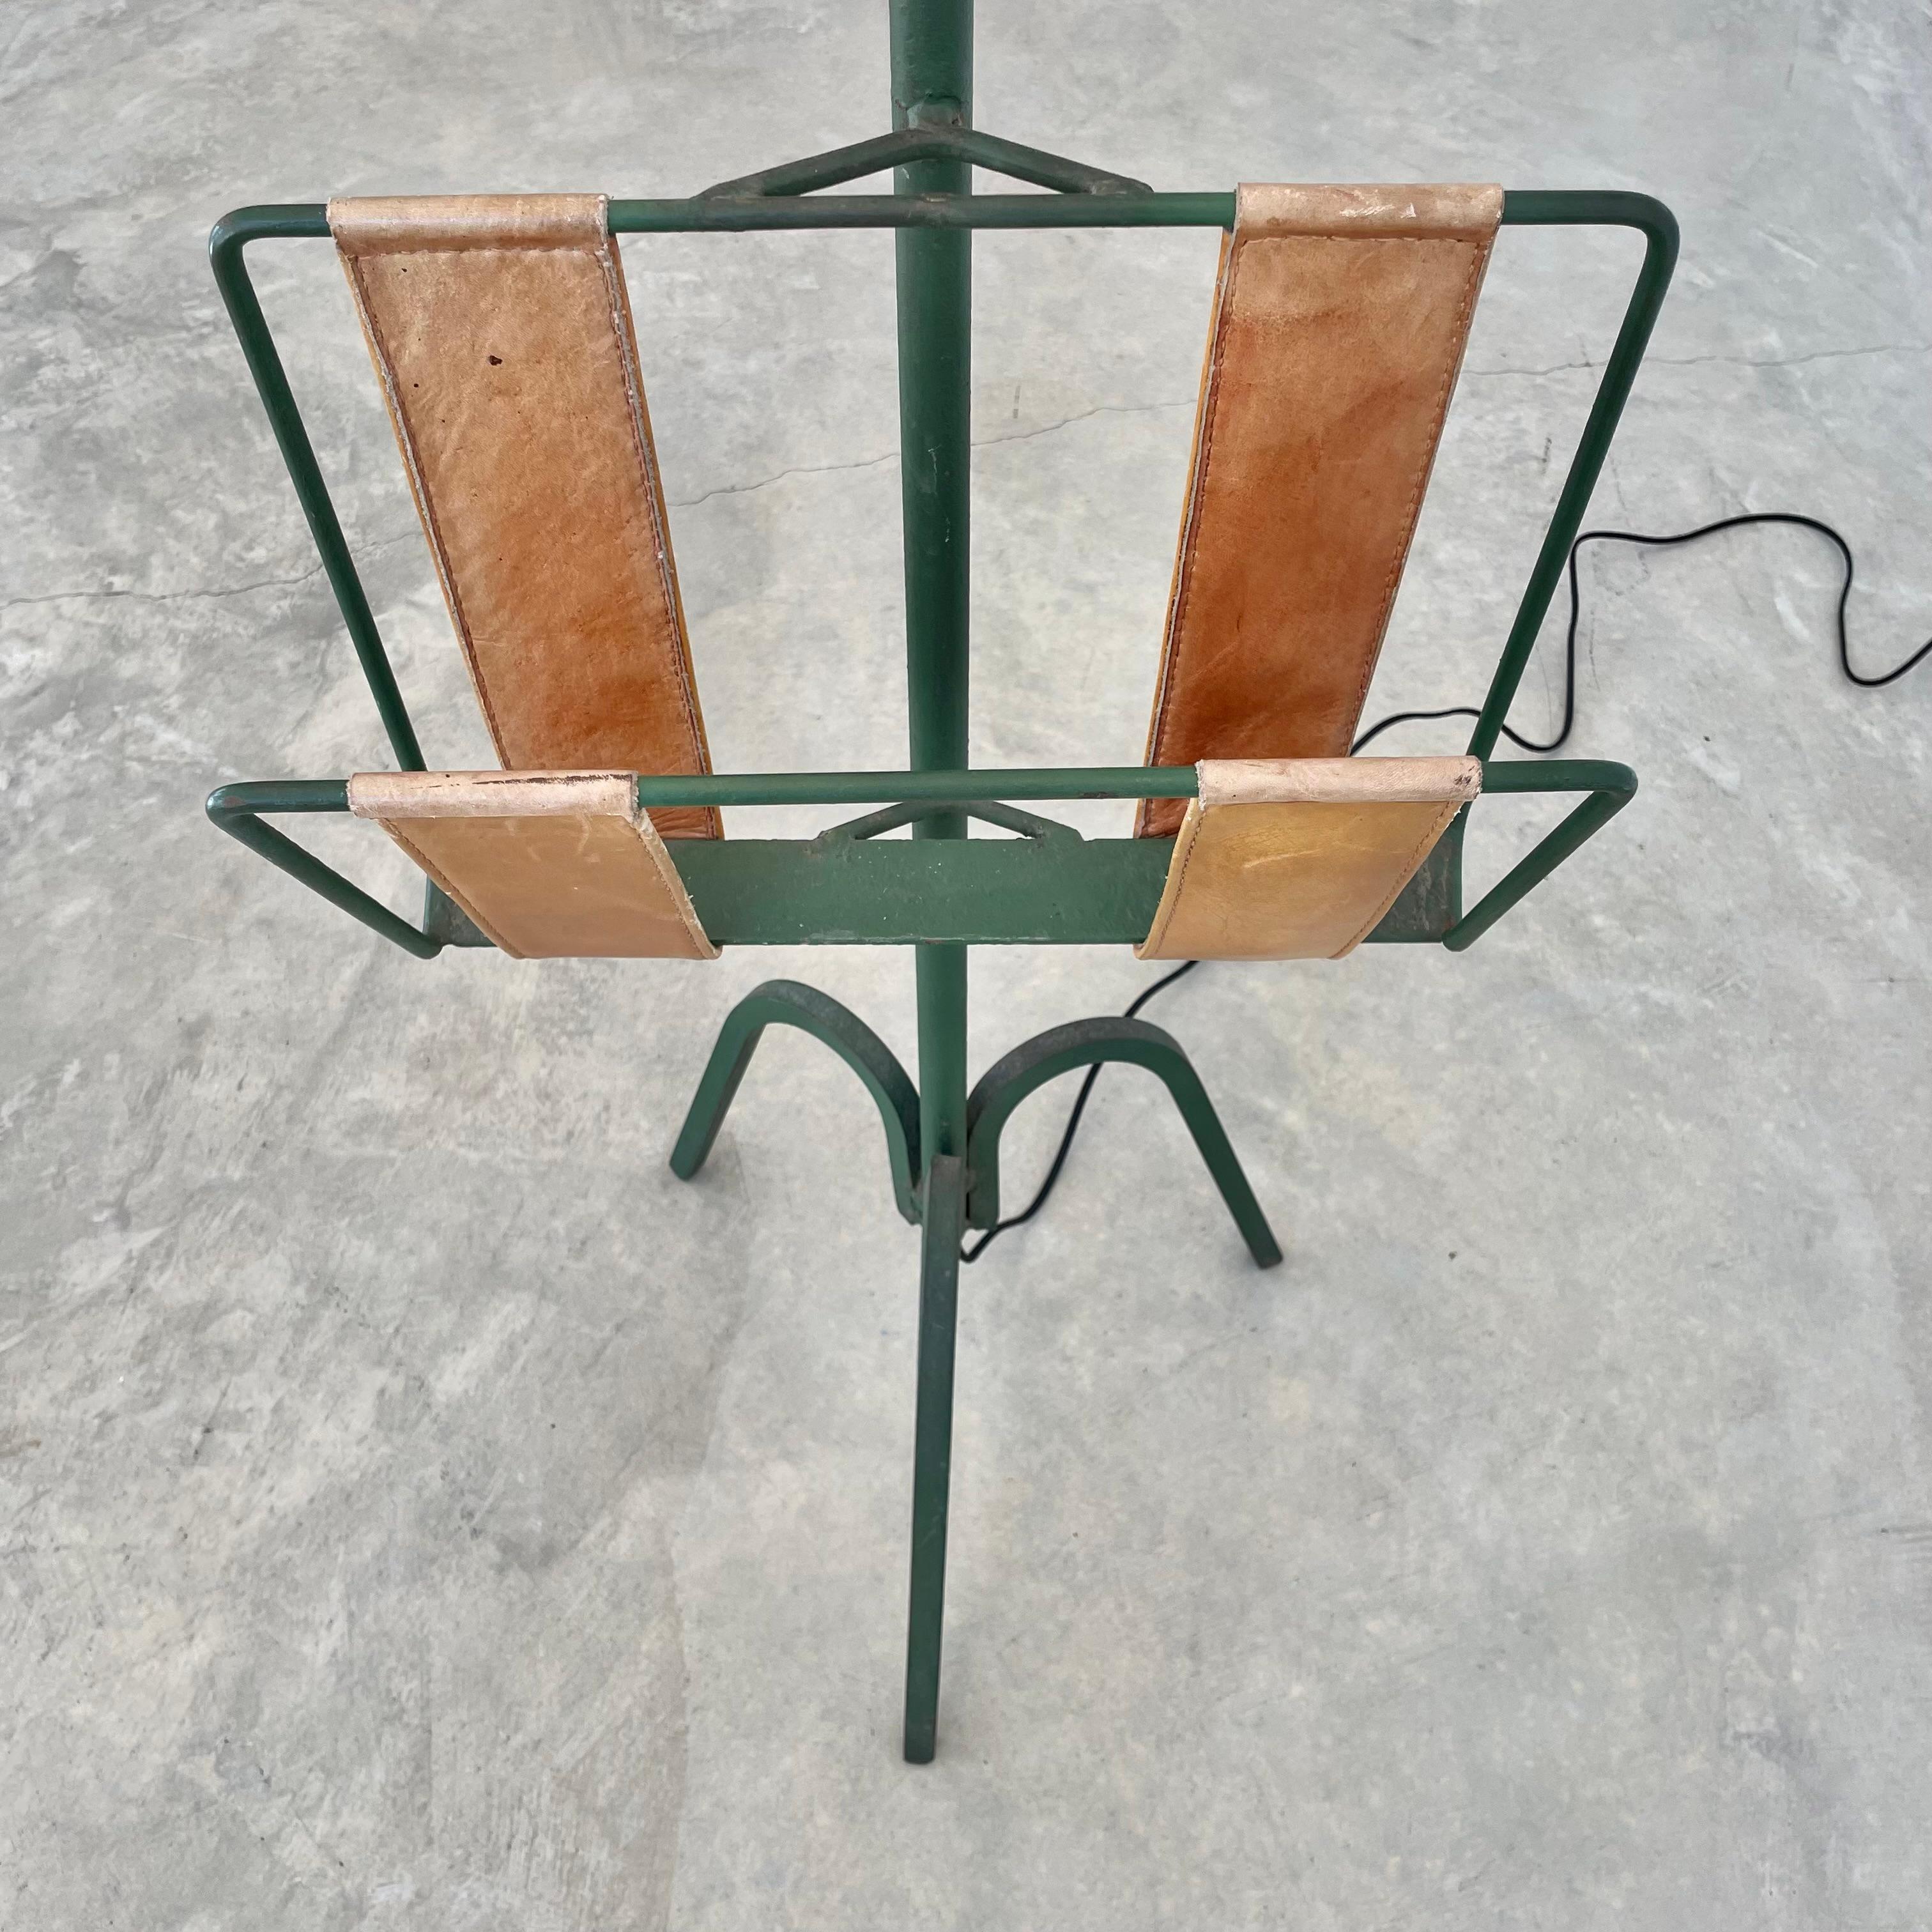 Leather Adjustable Iron Floor Lamp in the style of Jacques Adnet, 1950s France For Sale